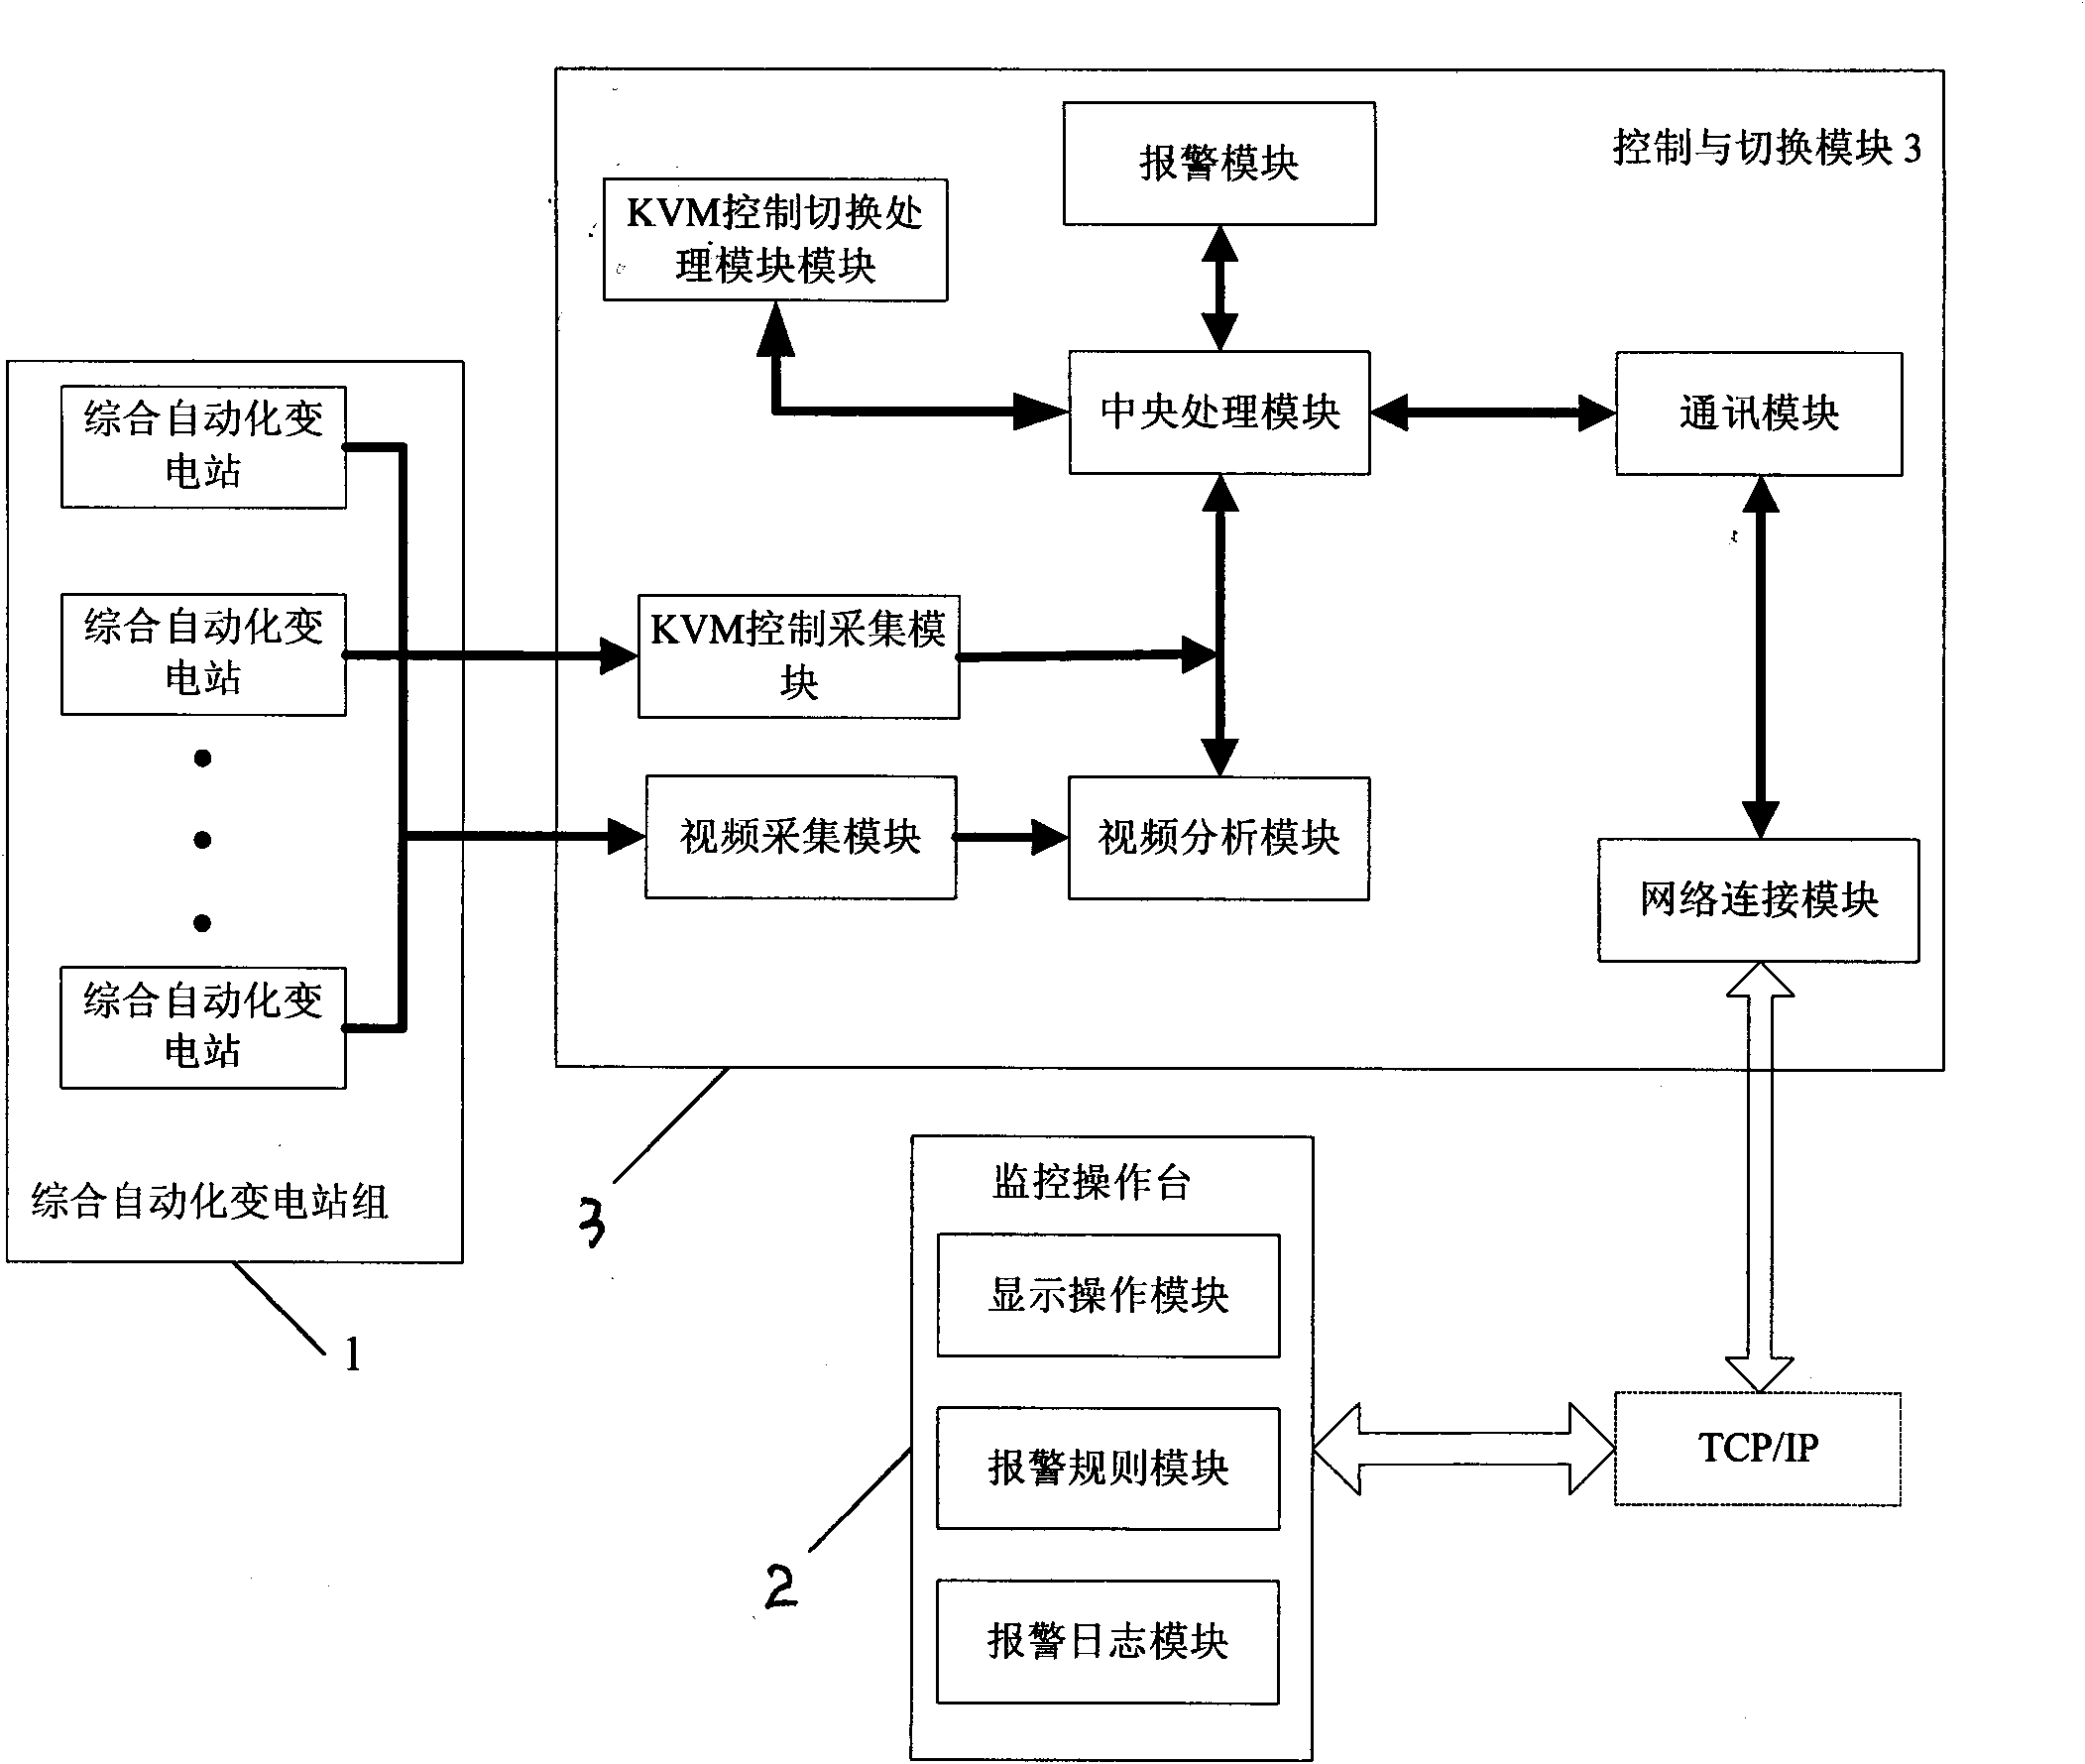 Network-based multi-station monitoring integrated matrix display control system